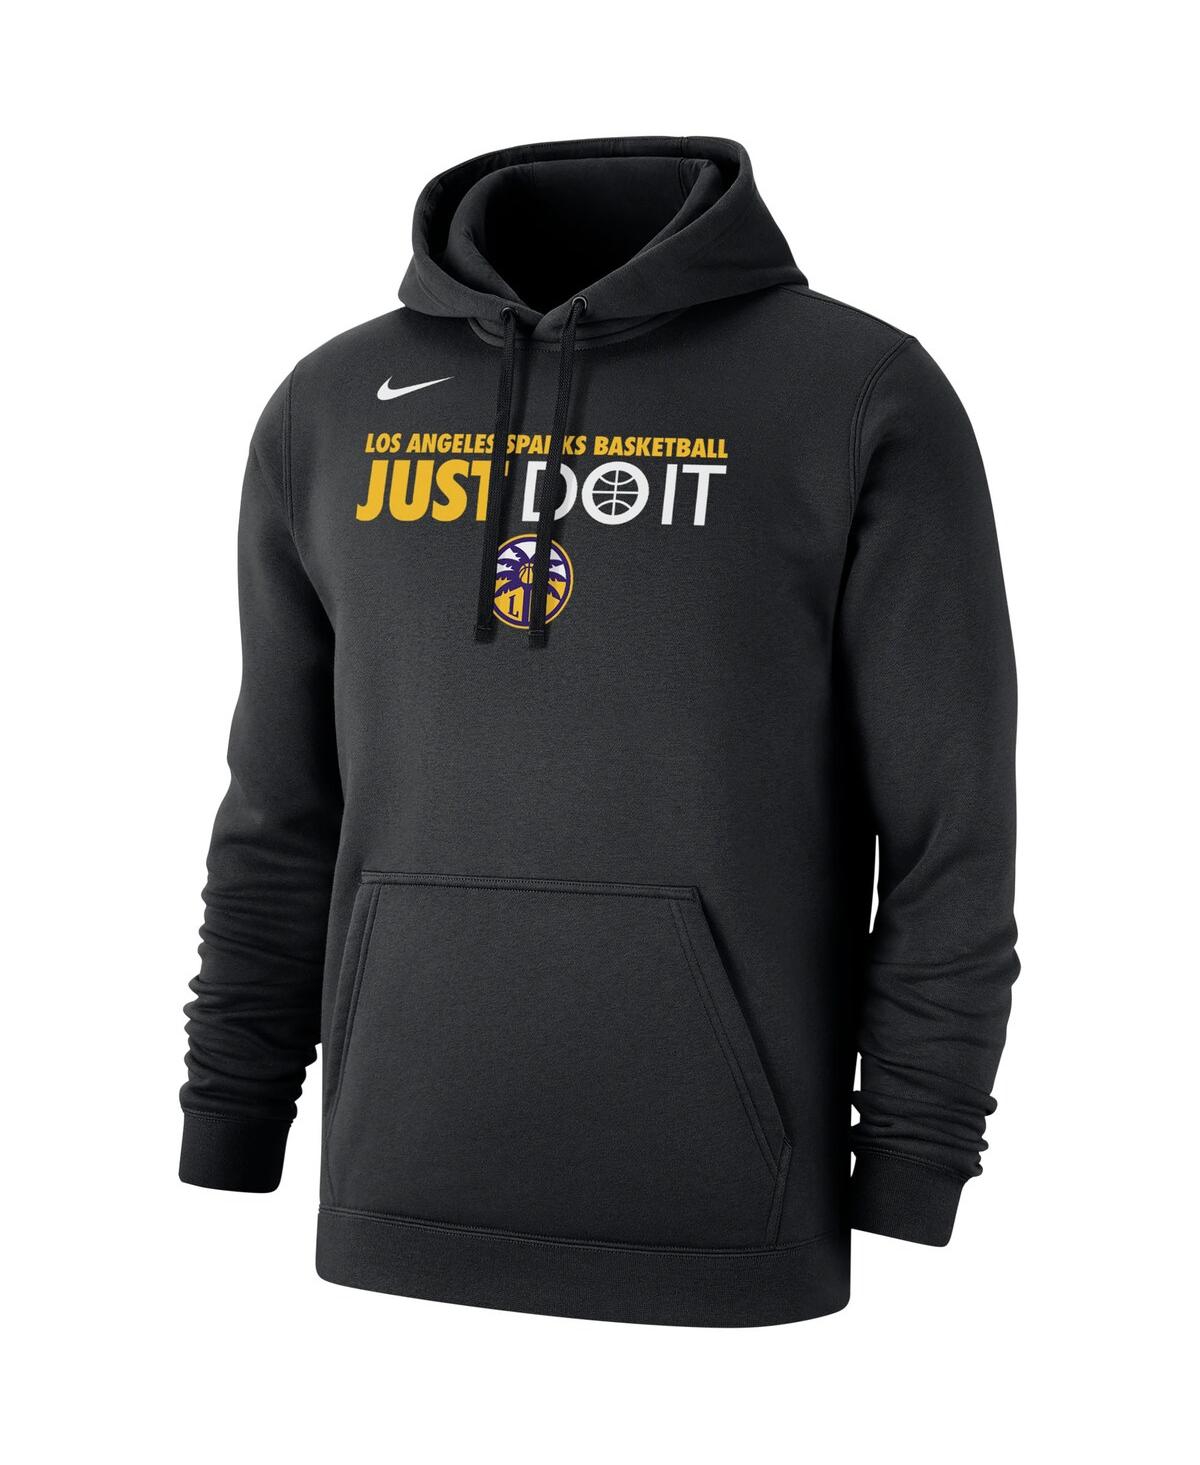 Shop Nike Men's And Women's  Black Los Angeles Sparks Just Do It Club Pullover Hoodie